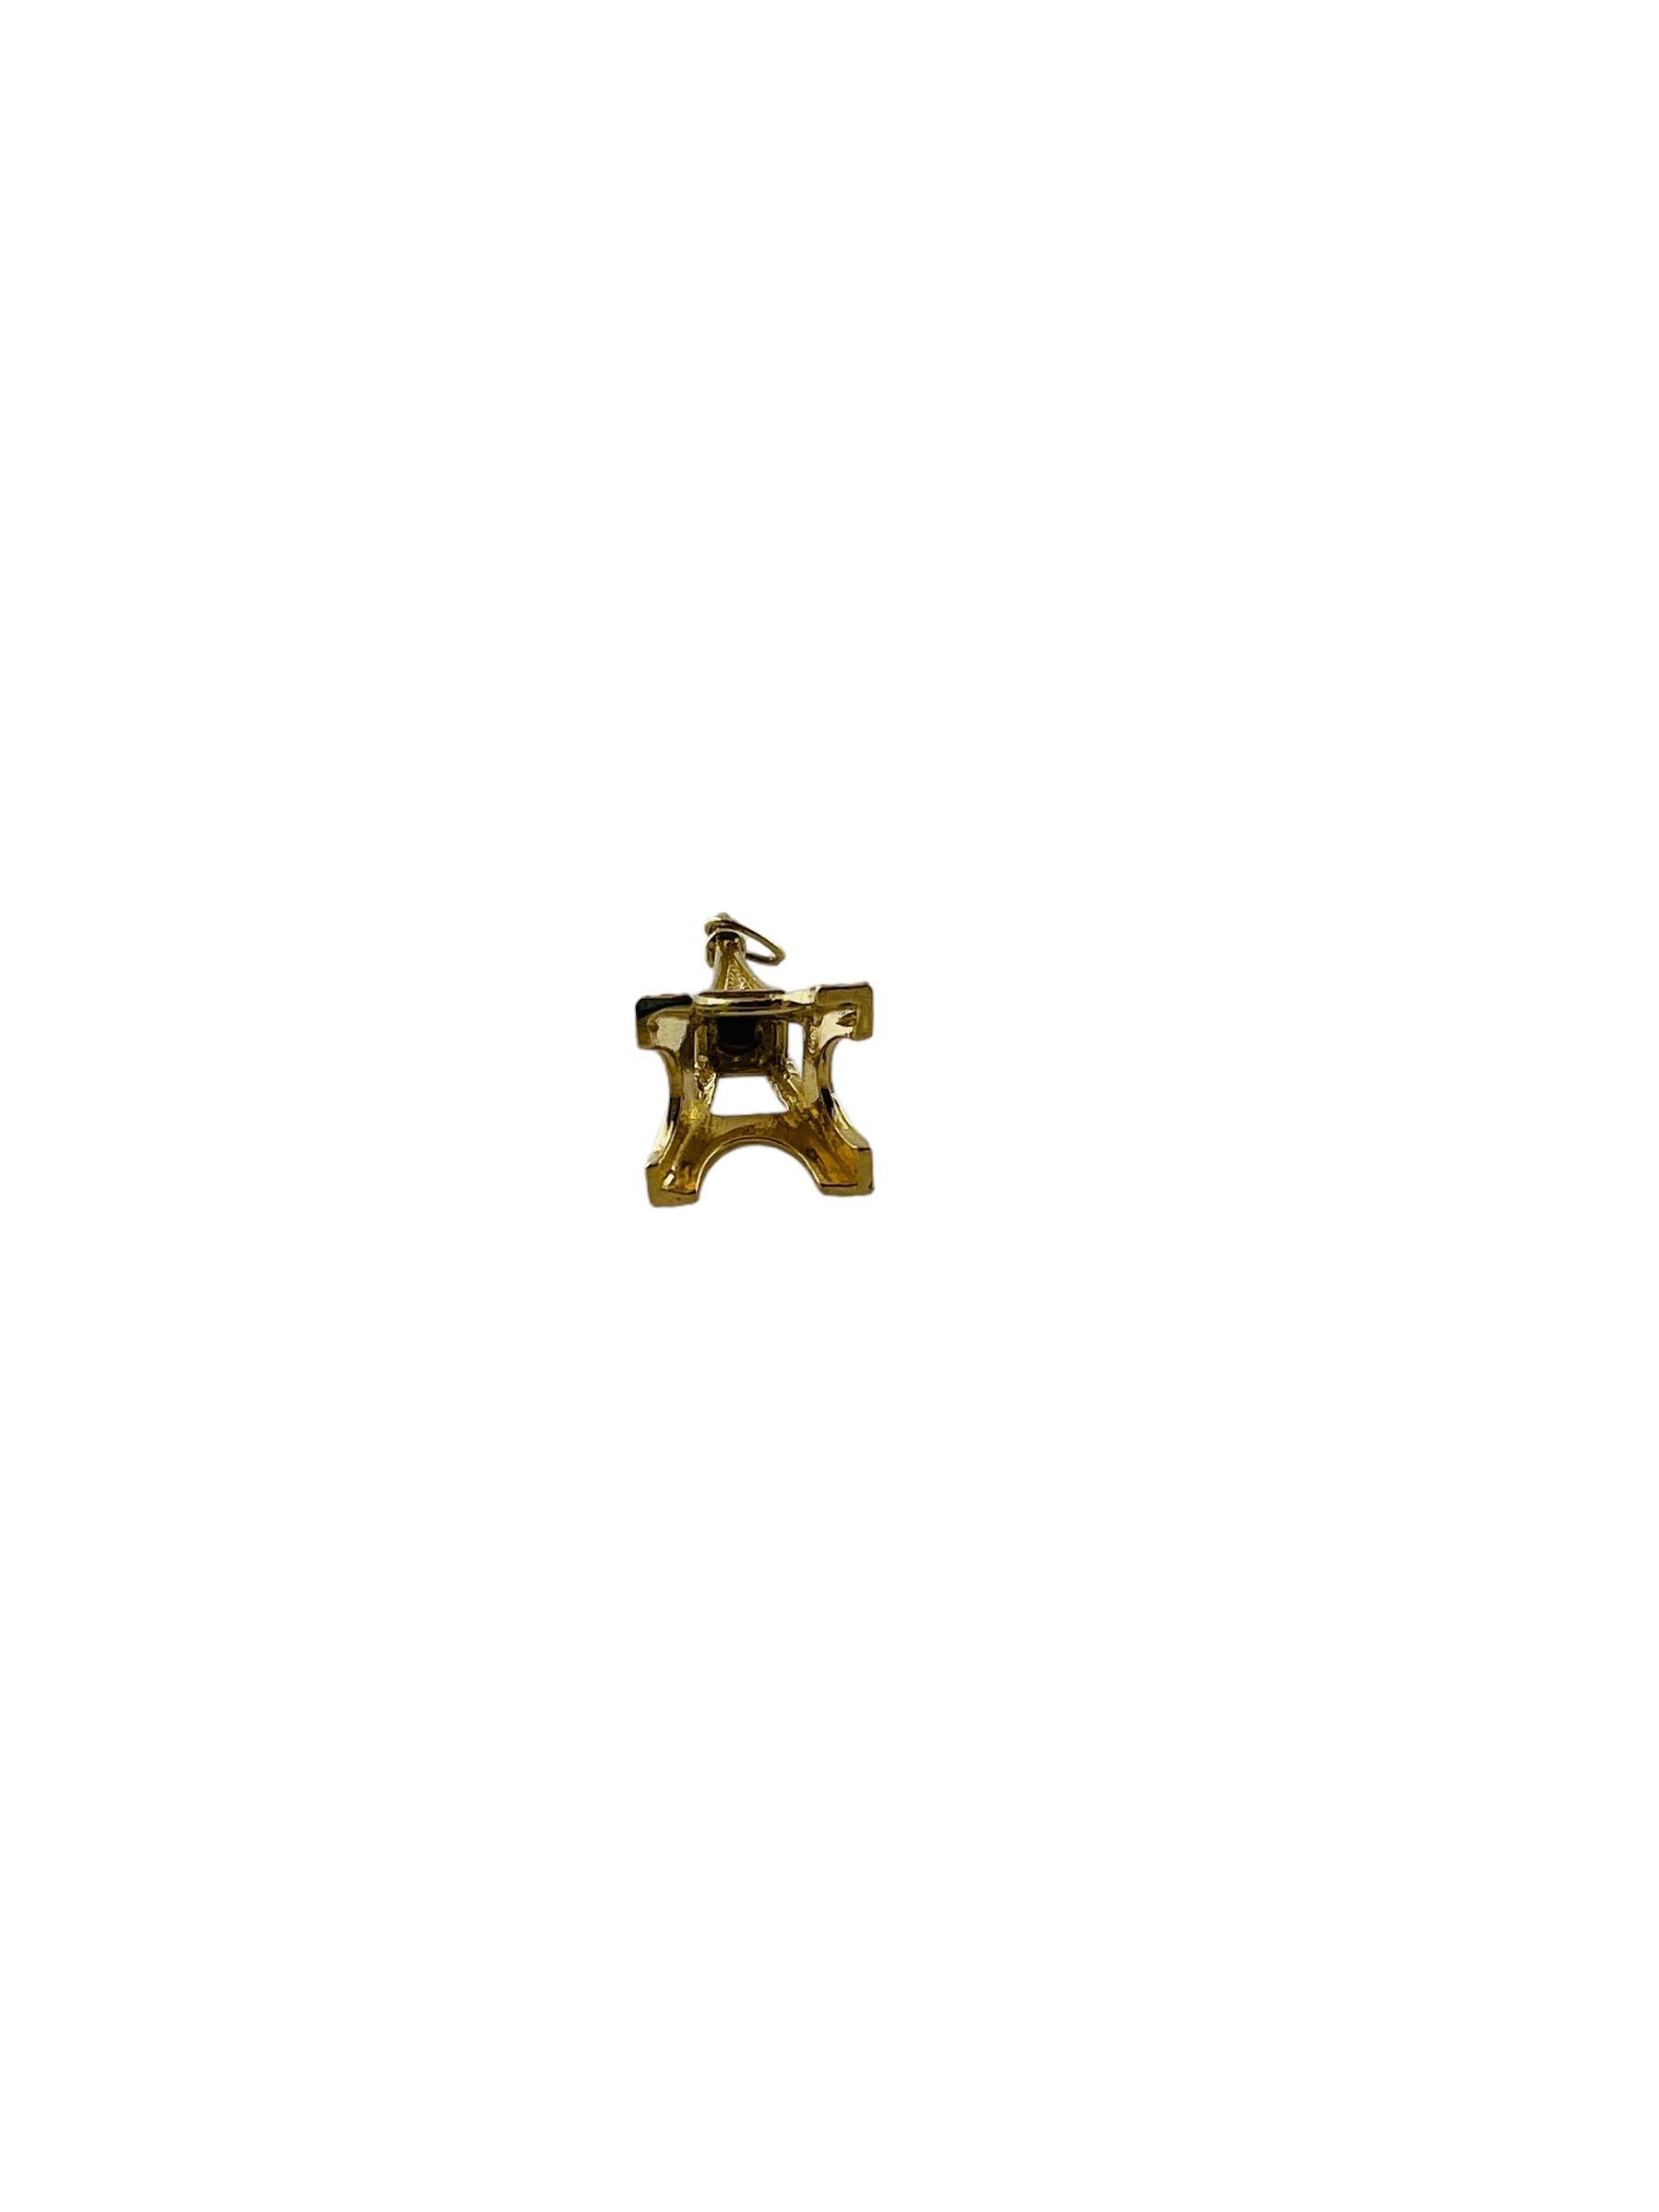 14K Yellow Gold Eiffel Tower Charm Pendant #15558 In Good Condition For Sale In Washington Depot, CT